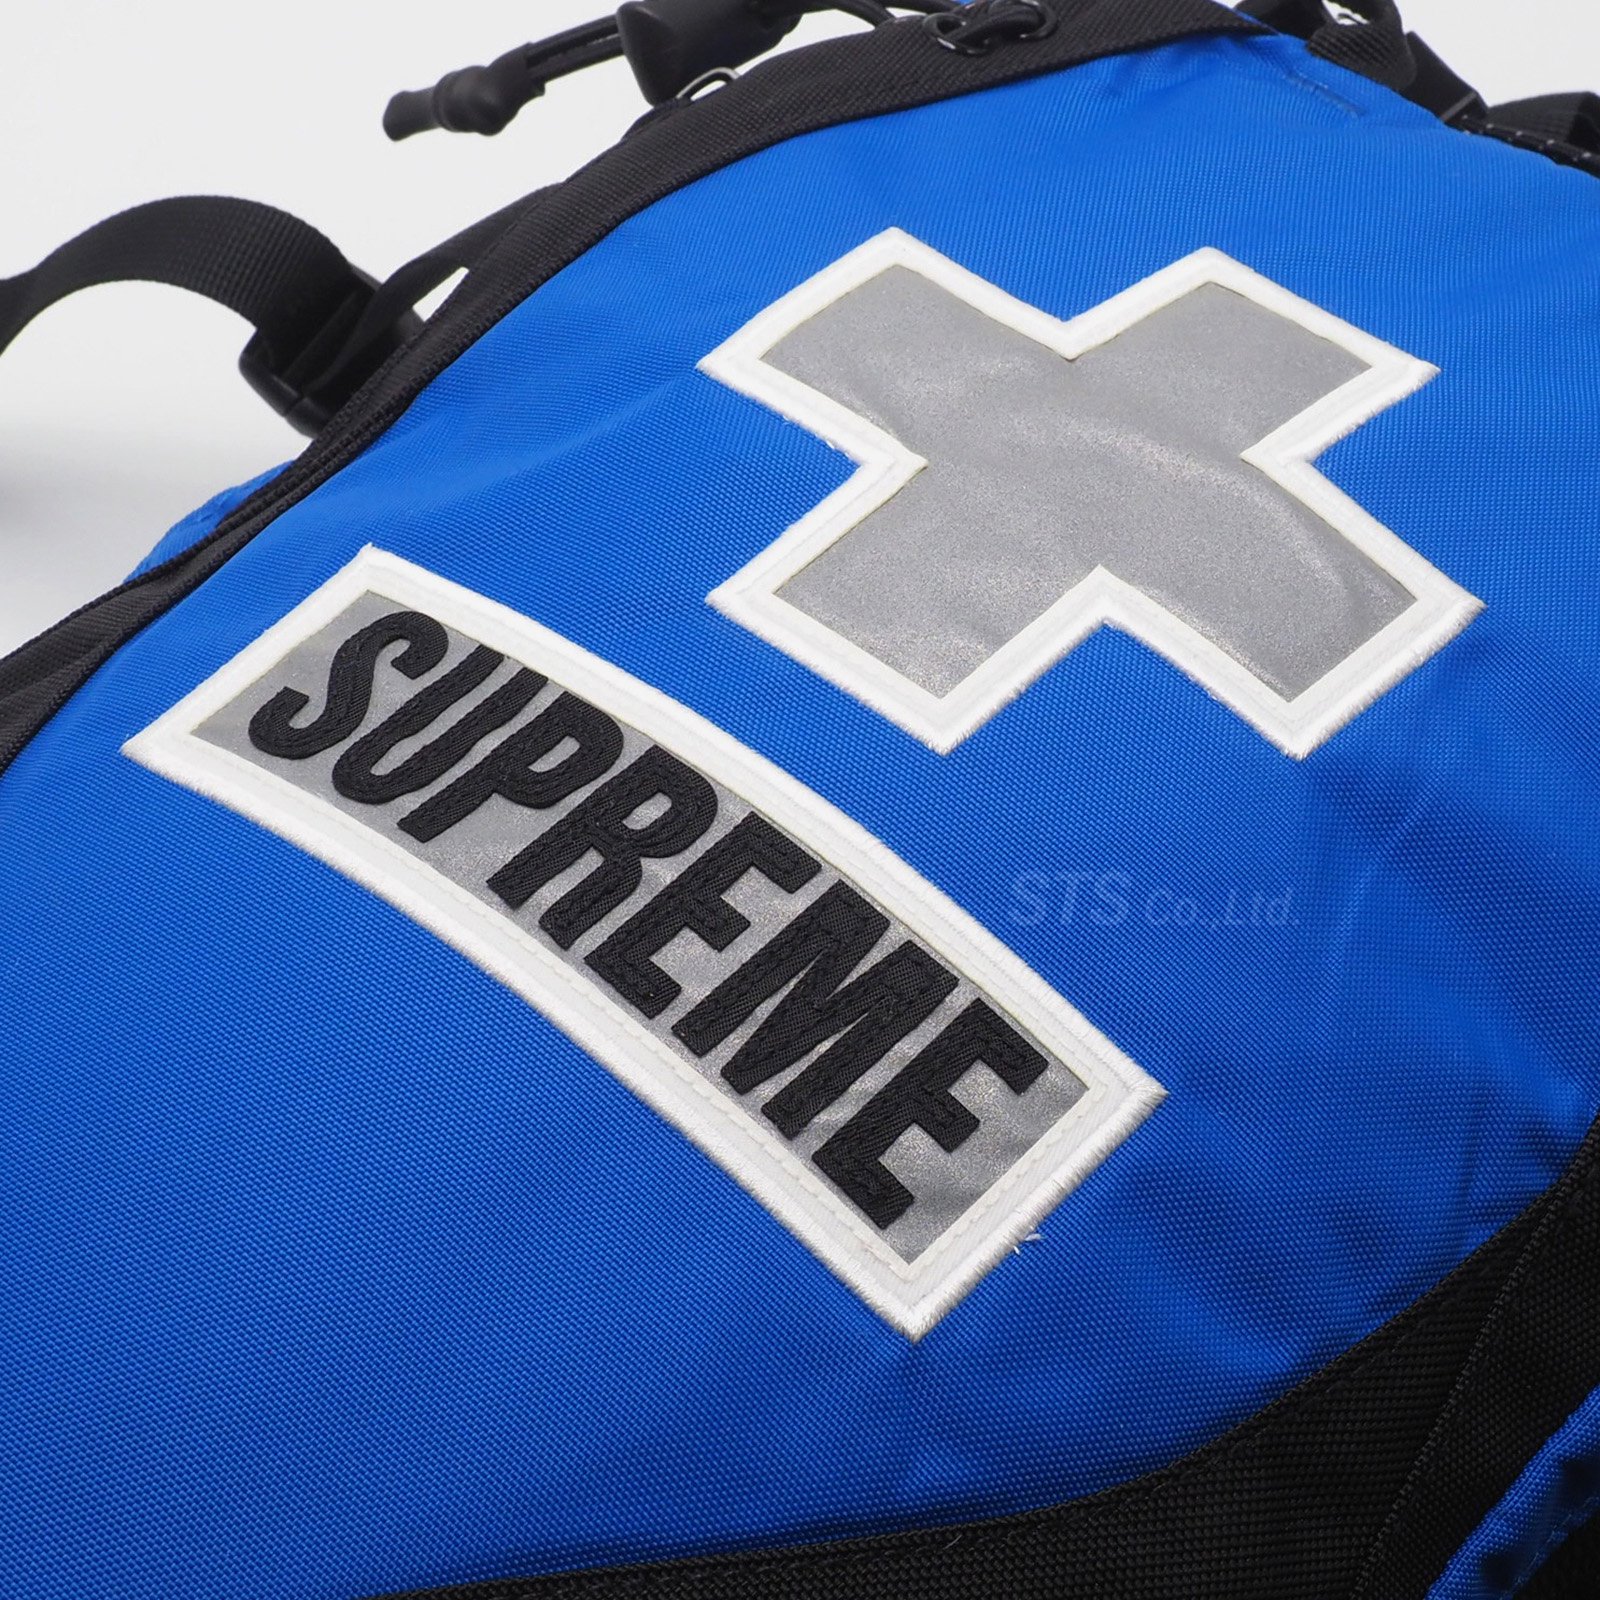 Supreme/The North Face Summit Series Rescue Chugach 16 Backpack ...